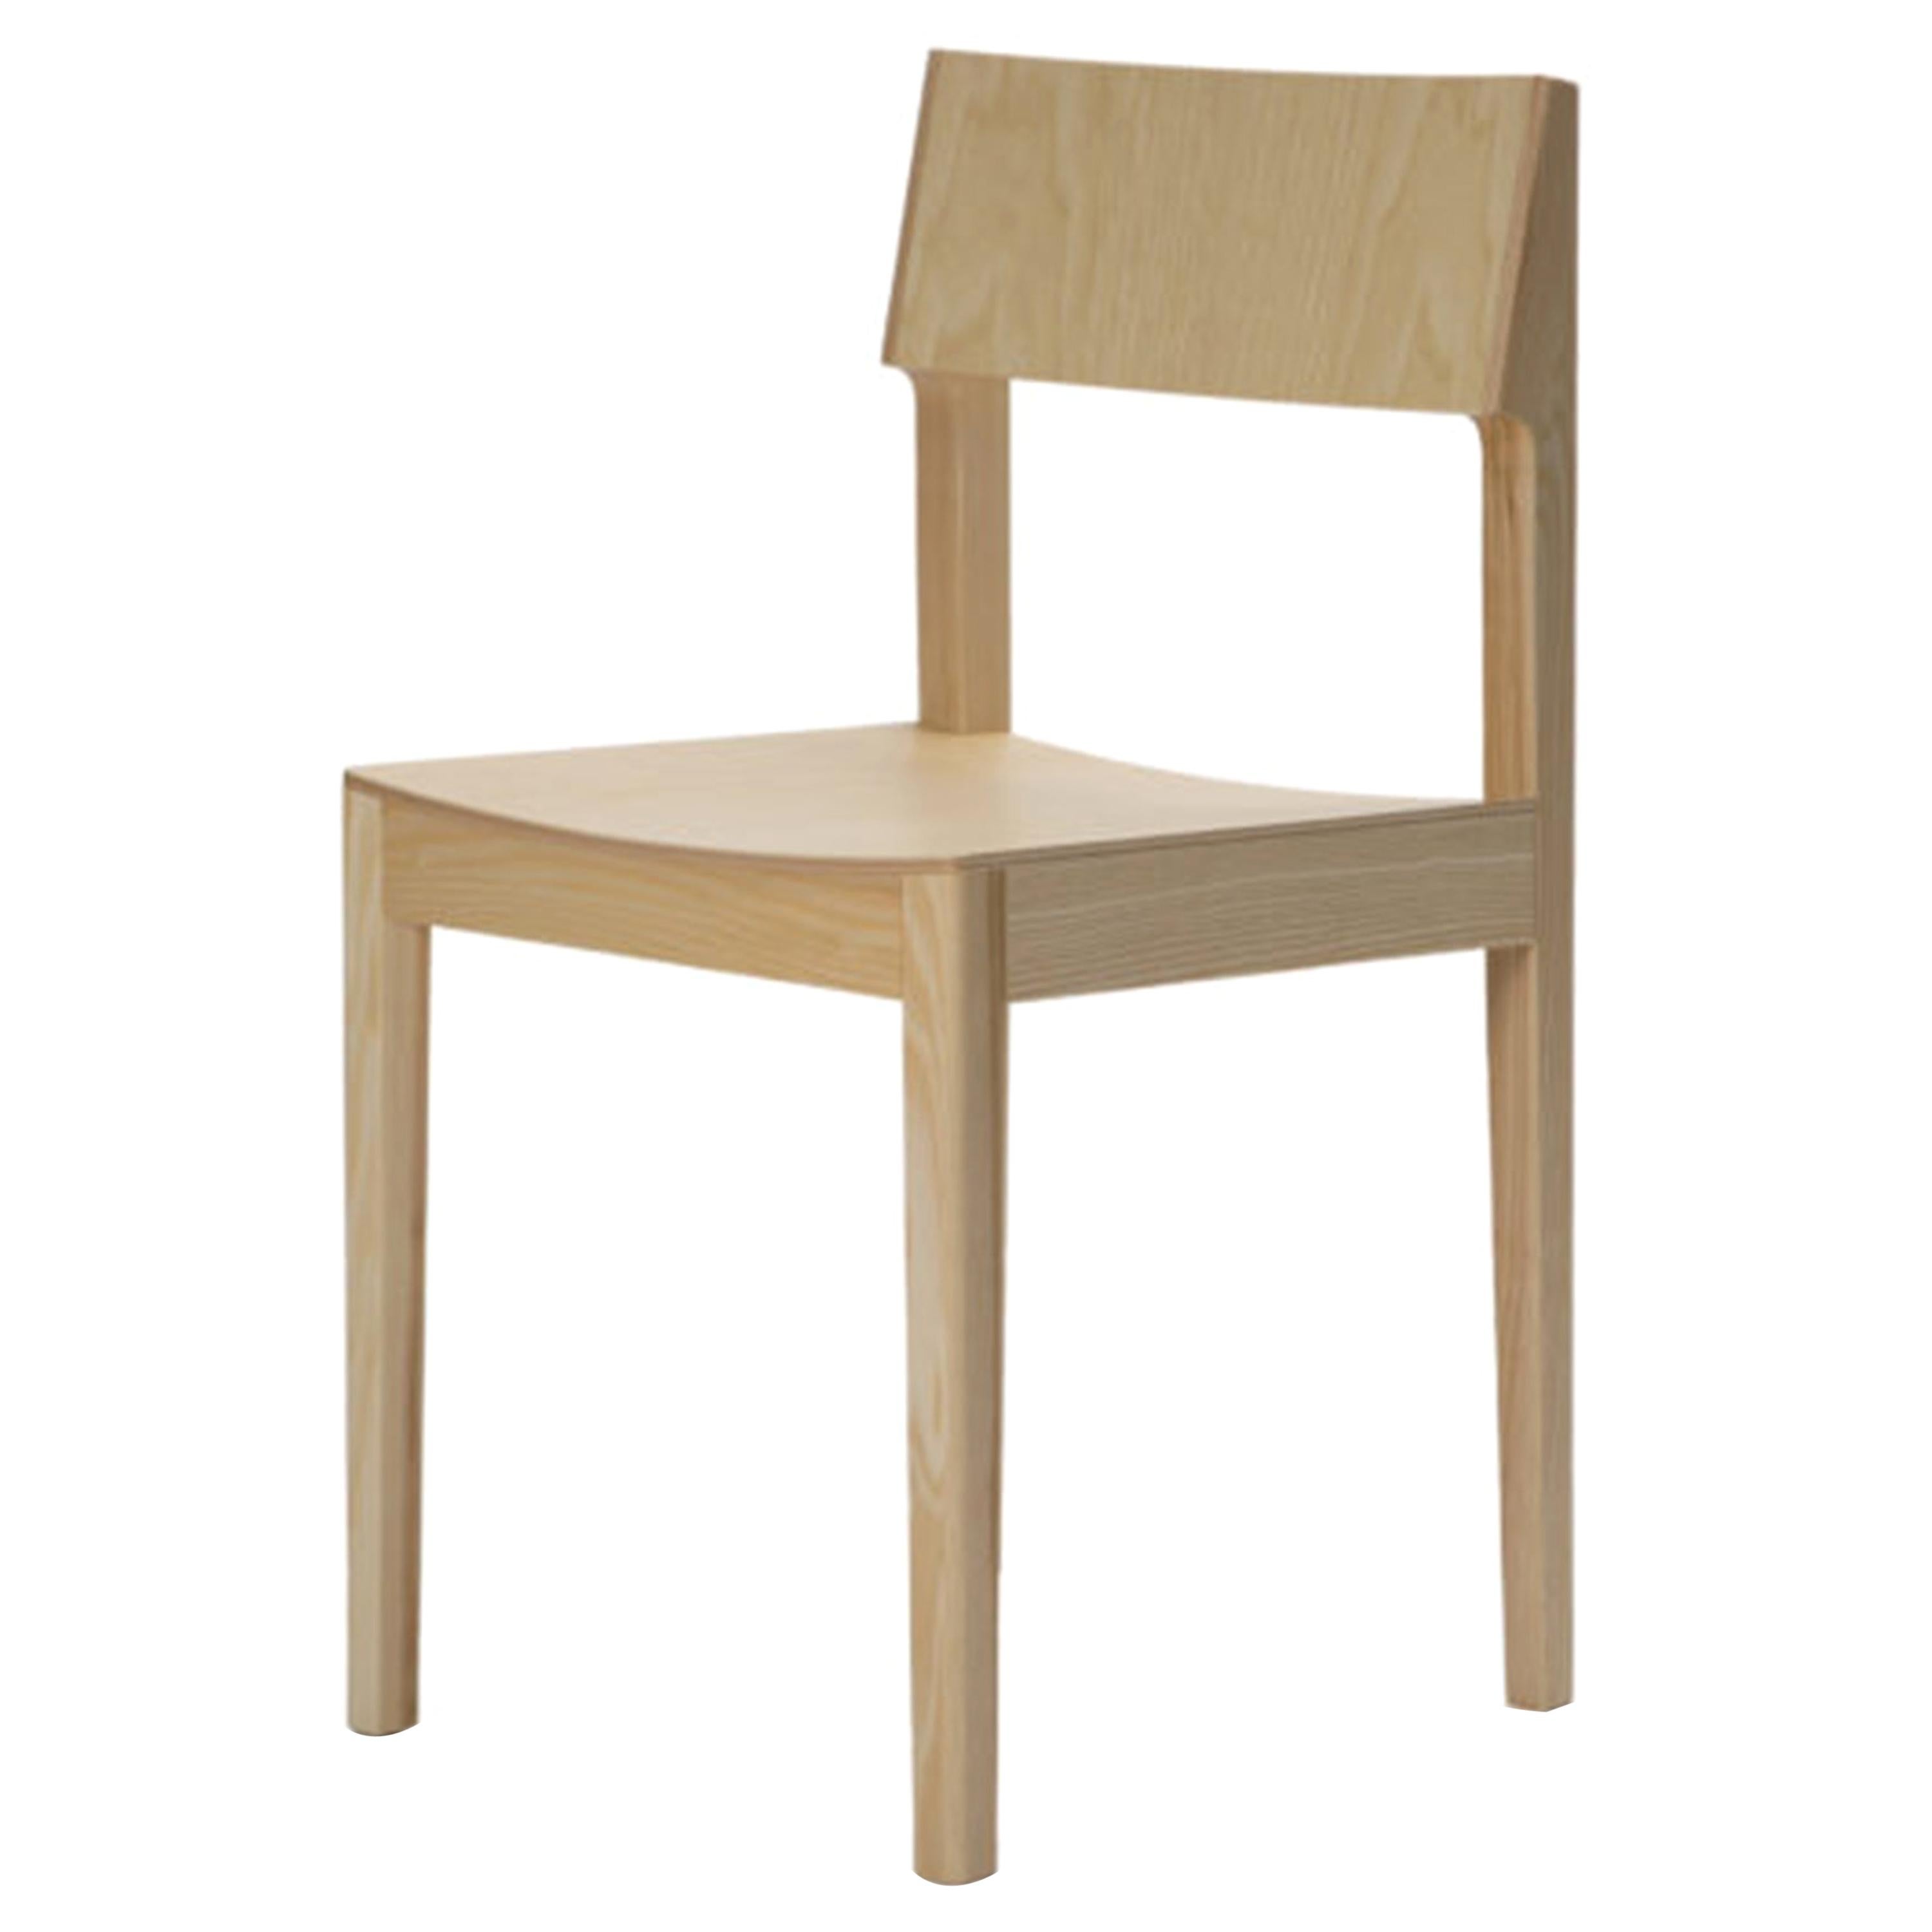 Inno Intro Stackable Wood Chair Designed by Ari Kanerva For Sale